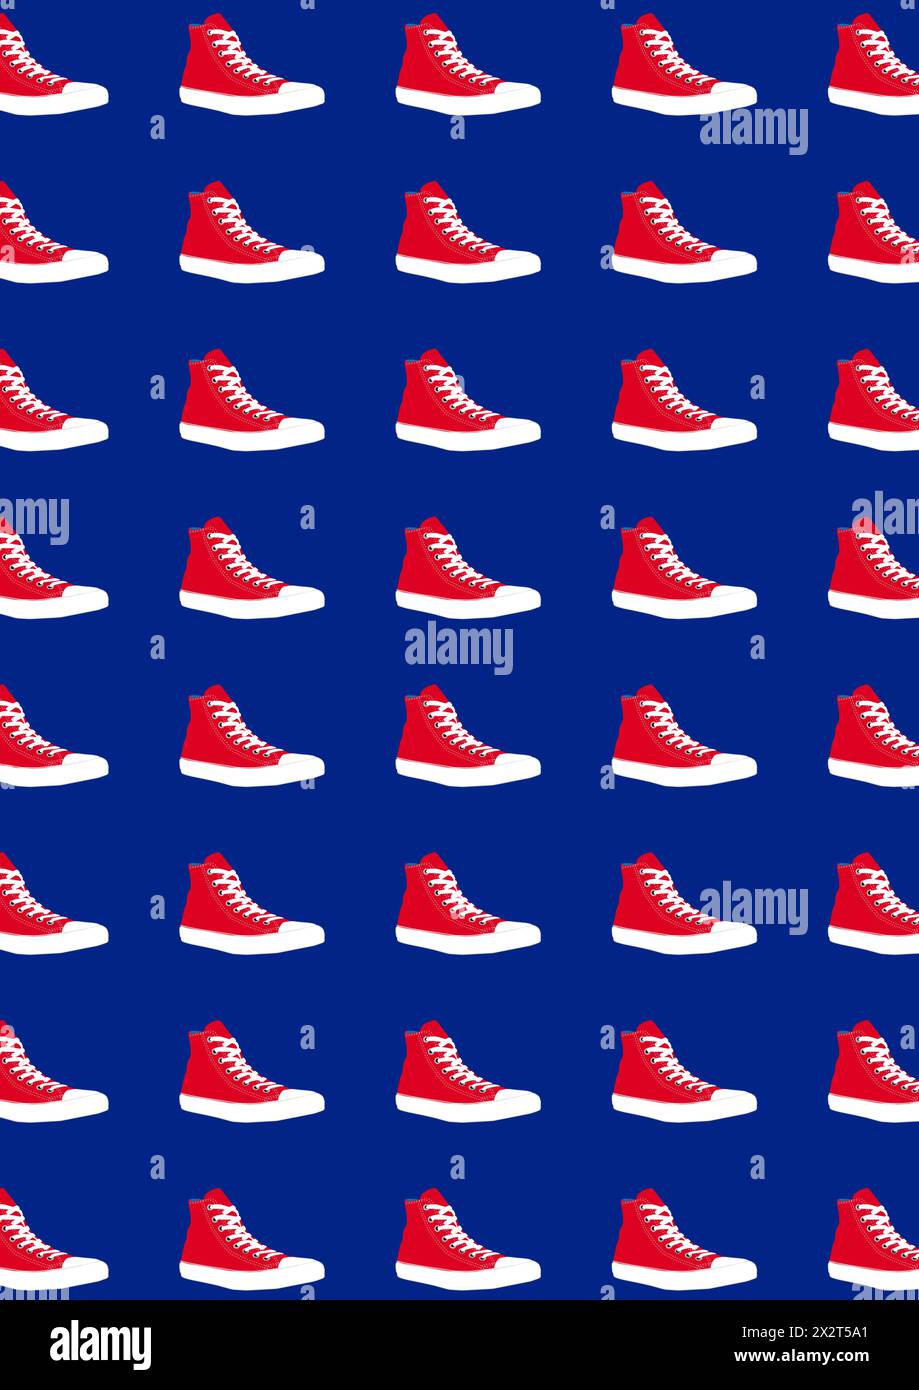 Pattern of rows of red sneakers against blue background Stock Photo